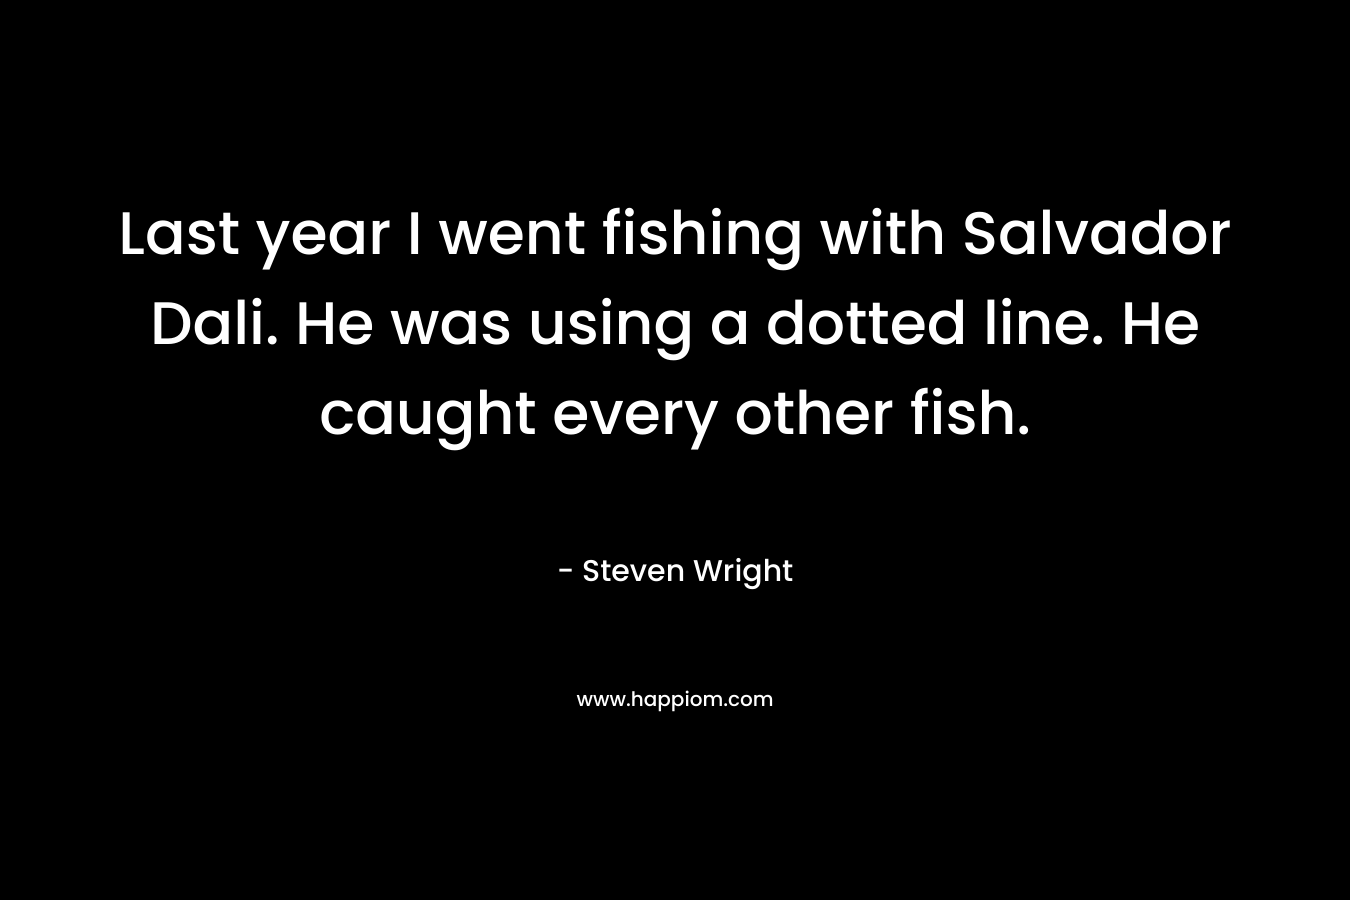 Last year I went fishing with Salvador Dali. He was using a dotted line. He caught every other fish. – Steven Wright